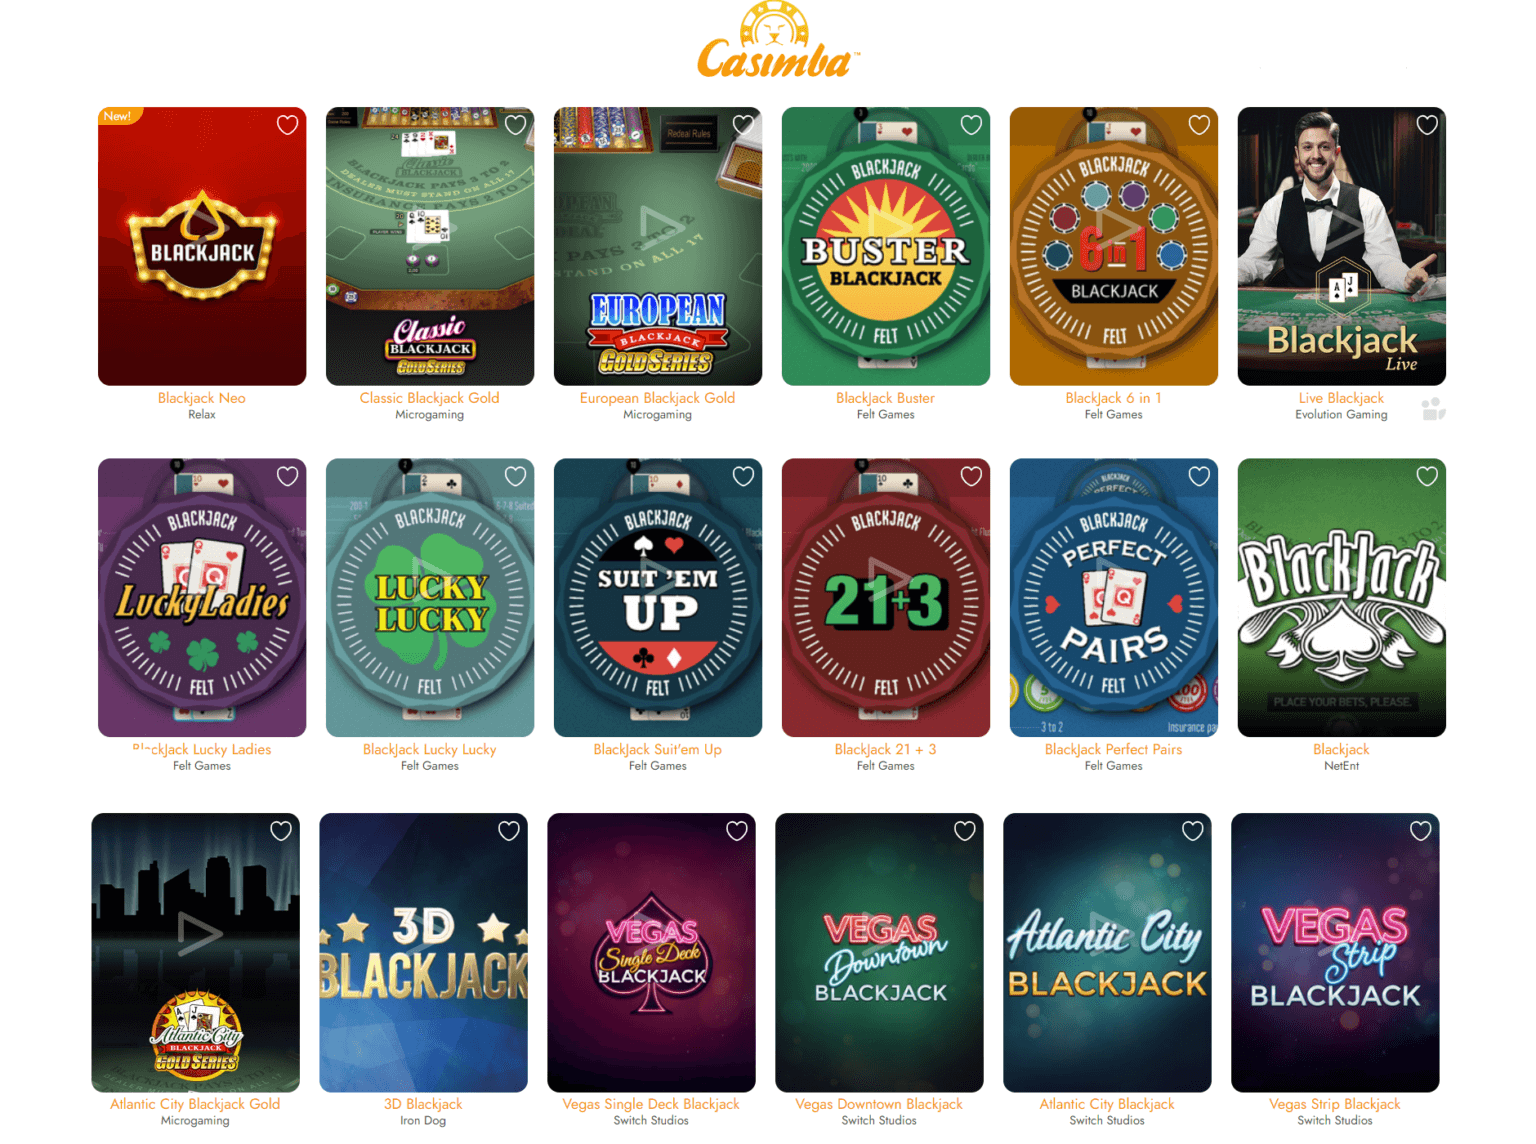 A screenshot showing the extensive list of blackjack tables available at Casimba